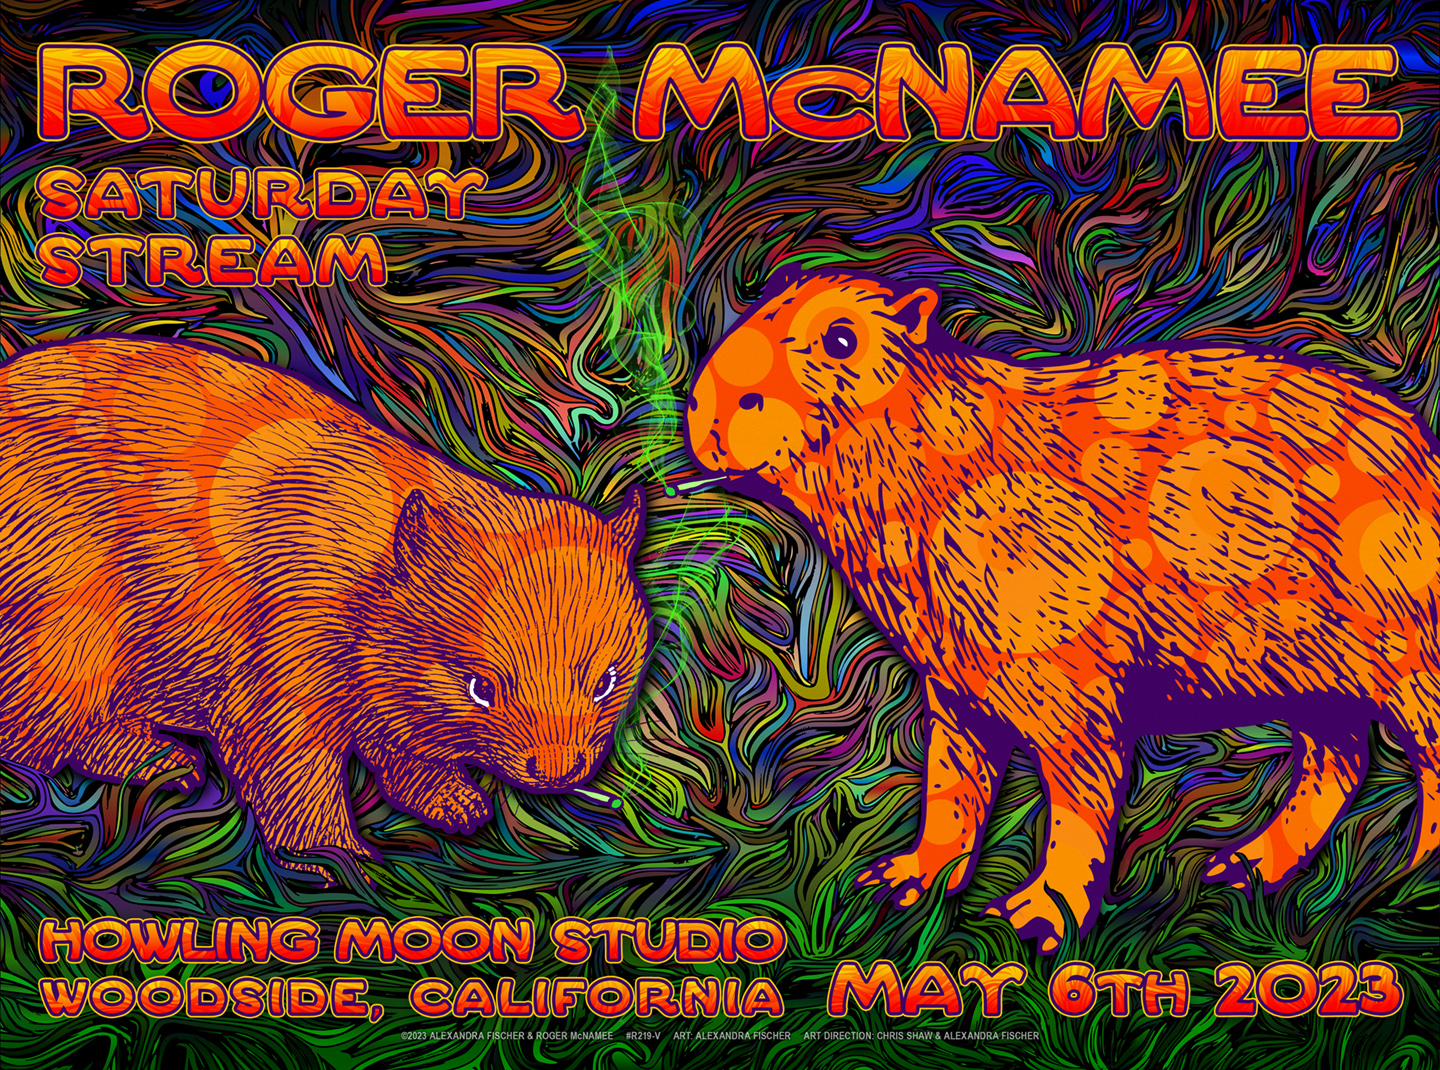 R219V › Roger McNamee 5/6/23 Saturday Stream, Howling Moon Studio, Woodside, California poster by Alexandra Fischer